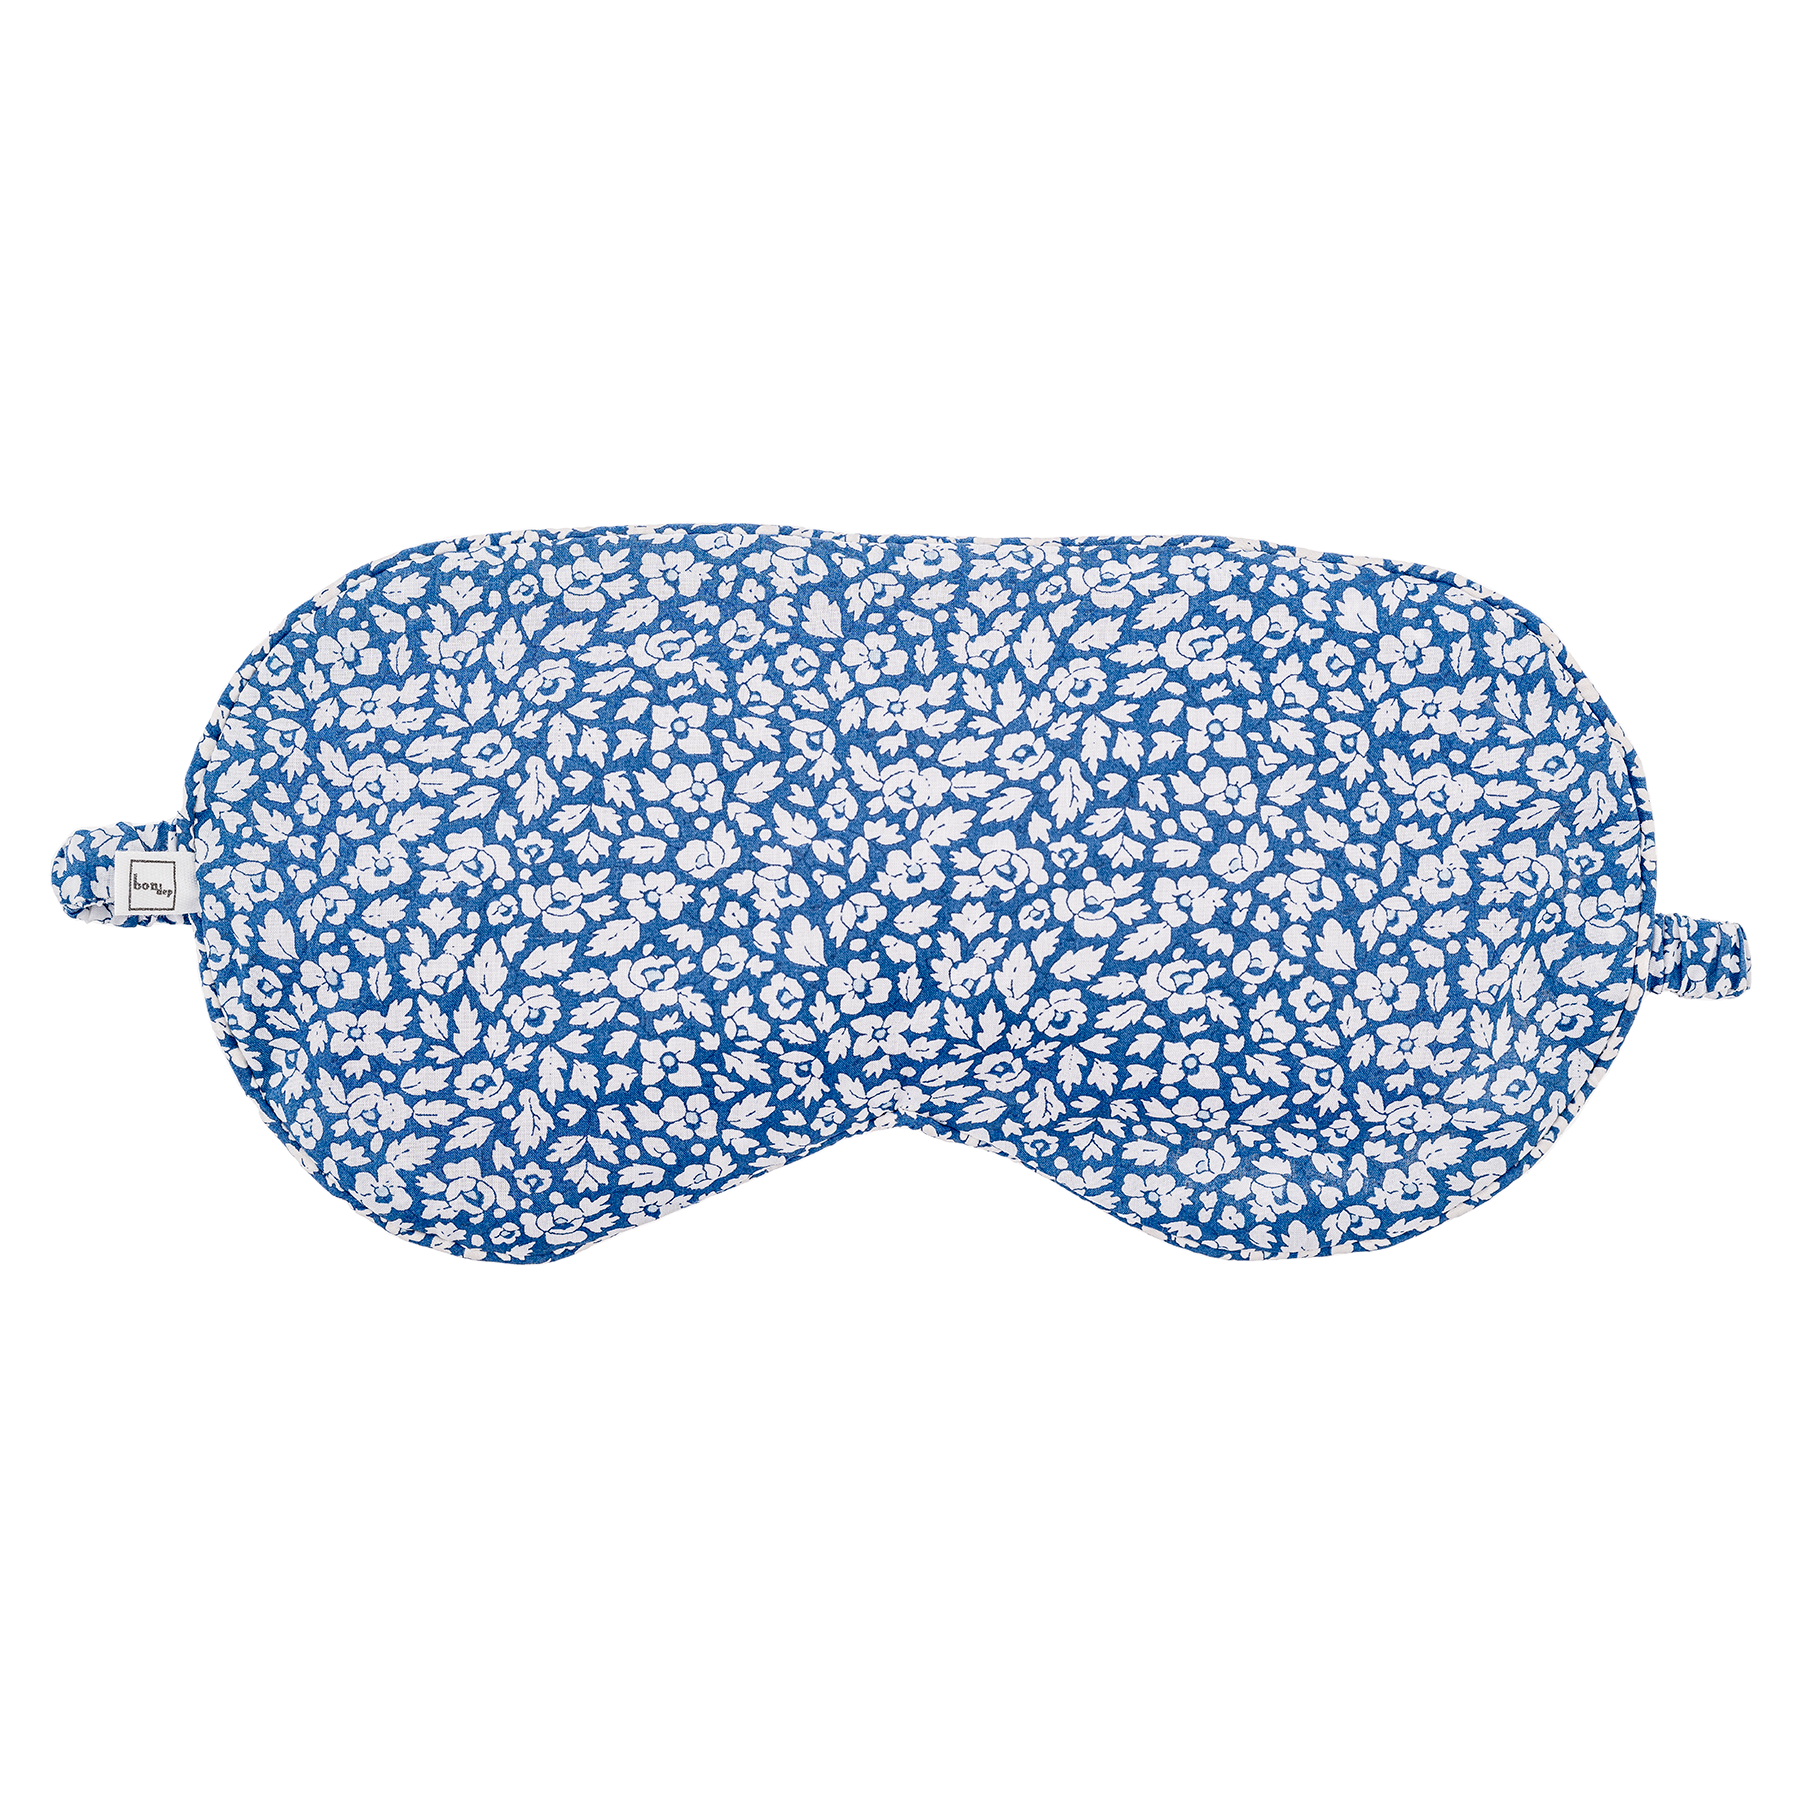 Image of Relaxing eye masks mw Liberty Feather Blue from Bon Dep Essentials